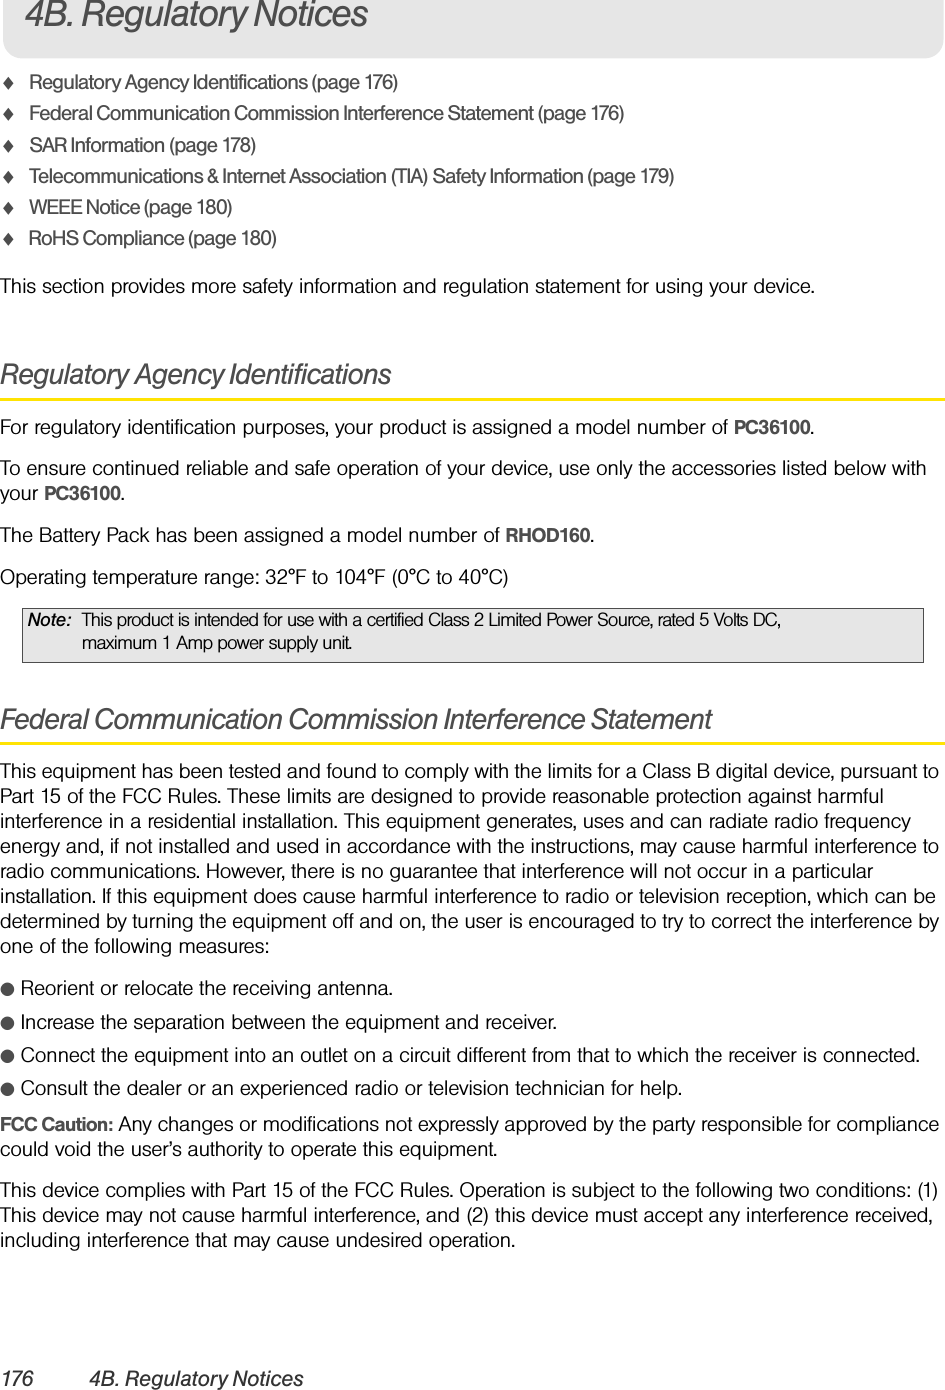 176 4B. Regulatory NoticesࡗRegulatory Agency Identifications (page 176)ࡗFederal Communication Commission Interference Statement (page 176)ࡗSAR Information (page 178)ࡗTelecommunications &amp; Internet Association (TIA) Safety Information (page 179)ࡗWEEE Notice (page 180)ࡗRoHS Compliance (page 180)This section provides more safety information and regulation statement for using your device.Regulatory Agency IdentificationsFor regulatory identification purposes, your product is assigned a model number of PC36100.To ensure continued reliable and safe operation of your device, use only the accessories listed below with your PC36100.The Battery Pack has been assigned a model number of RHOD160.Operating temperature range: 32°F to 104°F (0°C to 40°C)Federal Communication Commission Interference StatementThis equipment has been tested and found to comply with the limits for a Class B digital device, pursuant to Part 15 of the FCC Rules. These limits are designed to provide reasonable protection against harmful interference in a residential installation. This equipment generates, uses and can radiate radio frequency energy and, if not installed and used in accordance with the instructions, may cause harmful interference to radio communications. However, there is no guarantee that interference will not occur in a particular installation. If this equipment does cause harmful interference to radio or television reception, which can be determined by turning the equipment off and on, the user is encouraged to try to correct the interference by one of the following measures:ⅷReorient or relocate the receiving antenna.ⅷIncrease the separation between the equipment and receiver.ⅷConnect the equipment into an outlet on a circuit different from that to which the receiver is connected.ⅷConsult the dealer or an experienced radio or television technician for help.FCC Caution: Any changes or modifications not expressly approved by the party responsible for compliance could void the user’s authority to operate this equipment.This device complies with Part 15 of the FCC Rules. Operation is subject to the following two conditions: (1) This device may not cause harmful interference, and (2) this device must accept any interference received, including interference that may cause undesired operation.Note: This product is intended for use with a certified Class 2 Limited Power Source, rated 5 Volts DC, maximum 1 Amp power supply unit.4B. Regulatory Notices